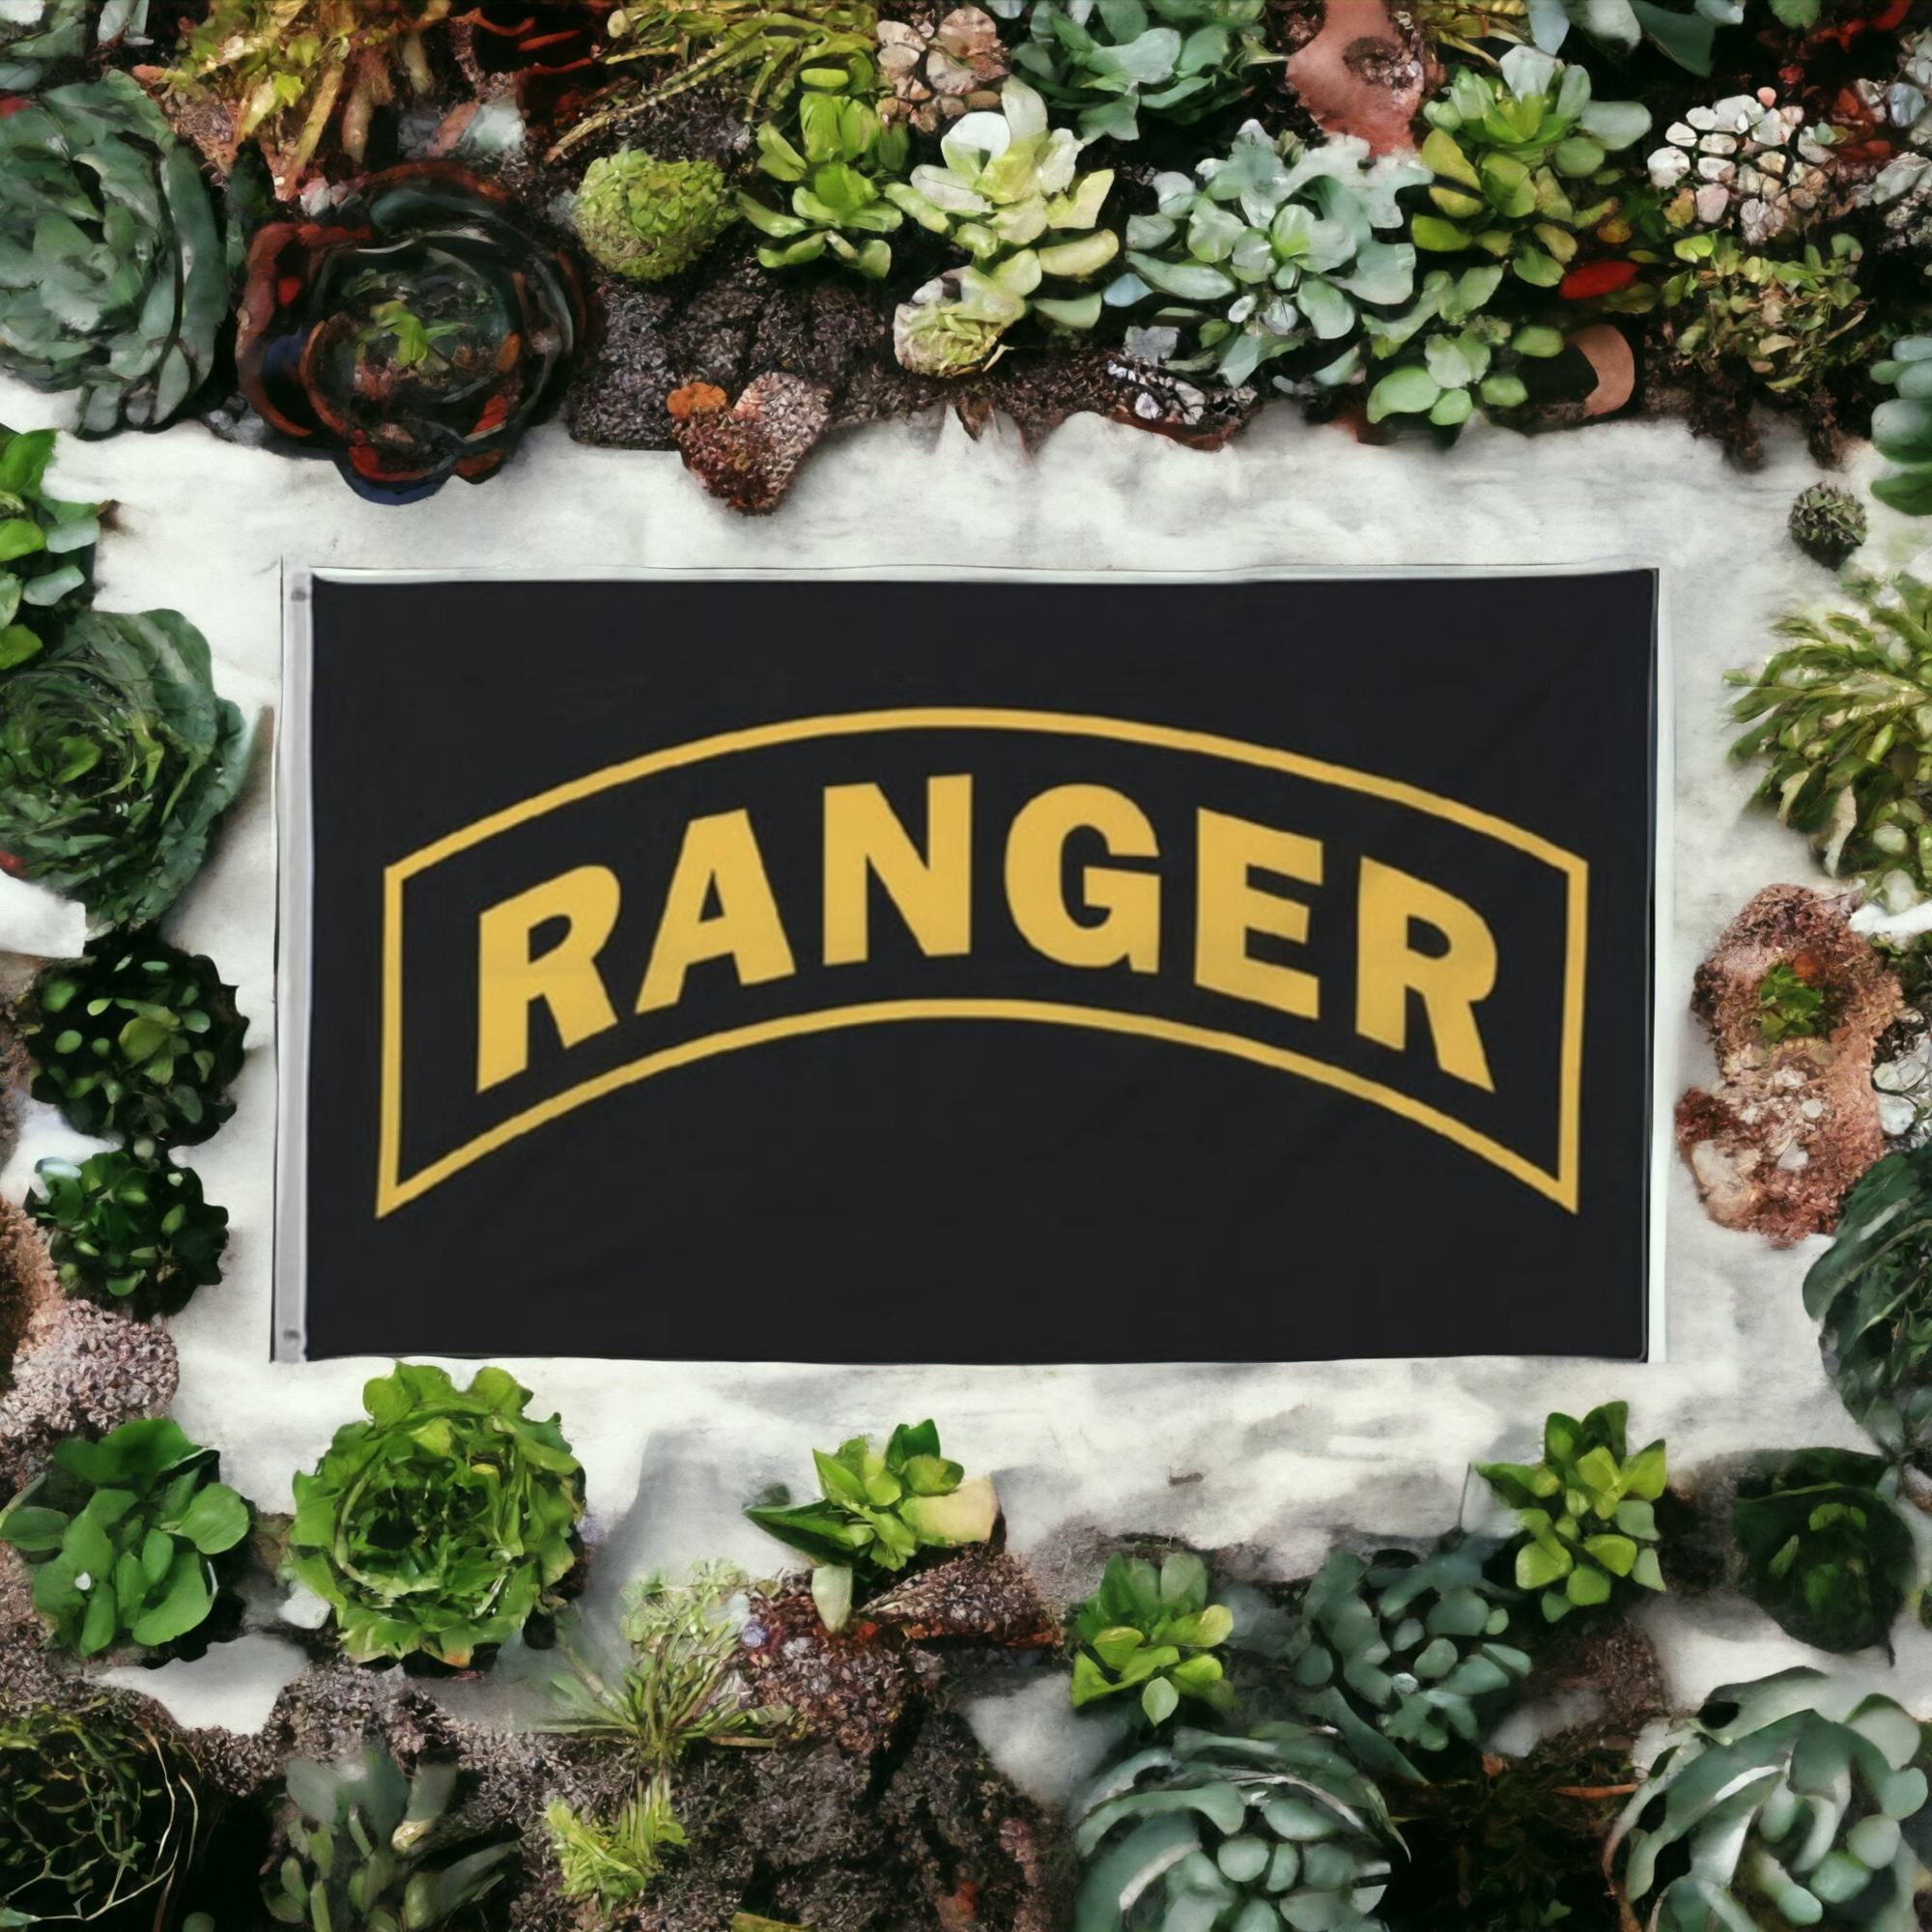 US Army Ranger Flag (Official)